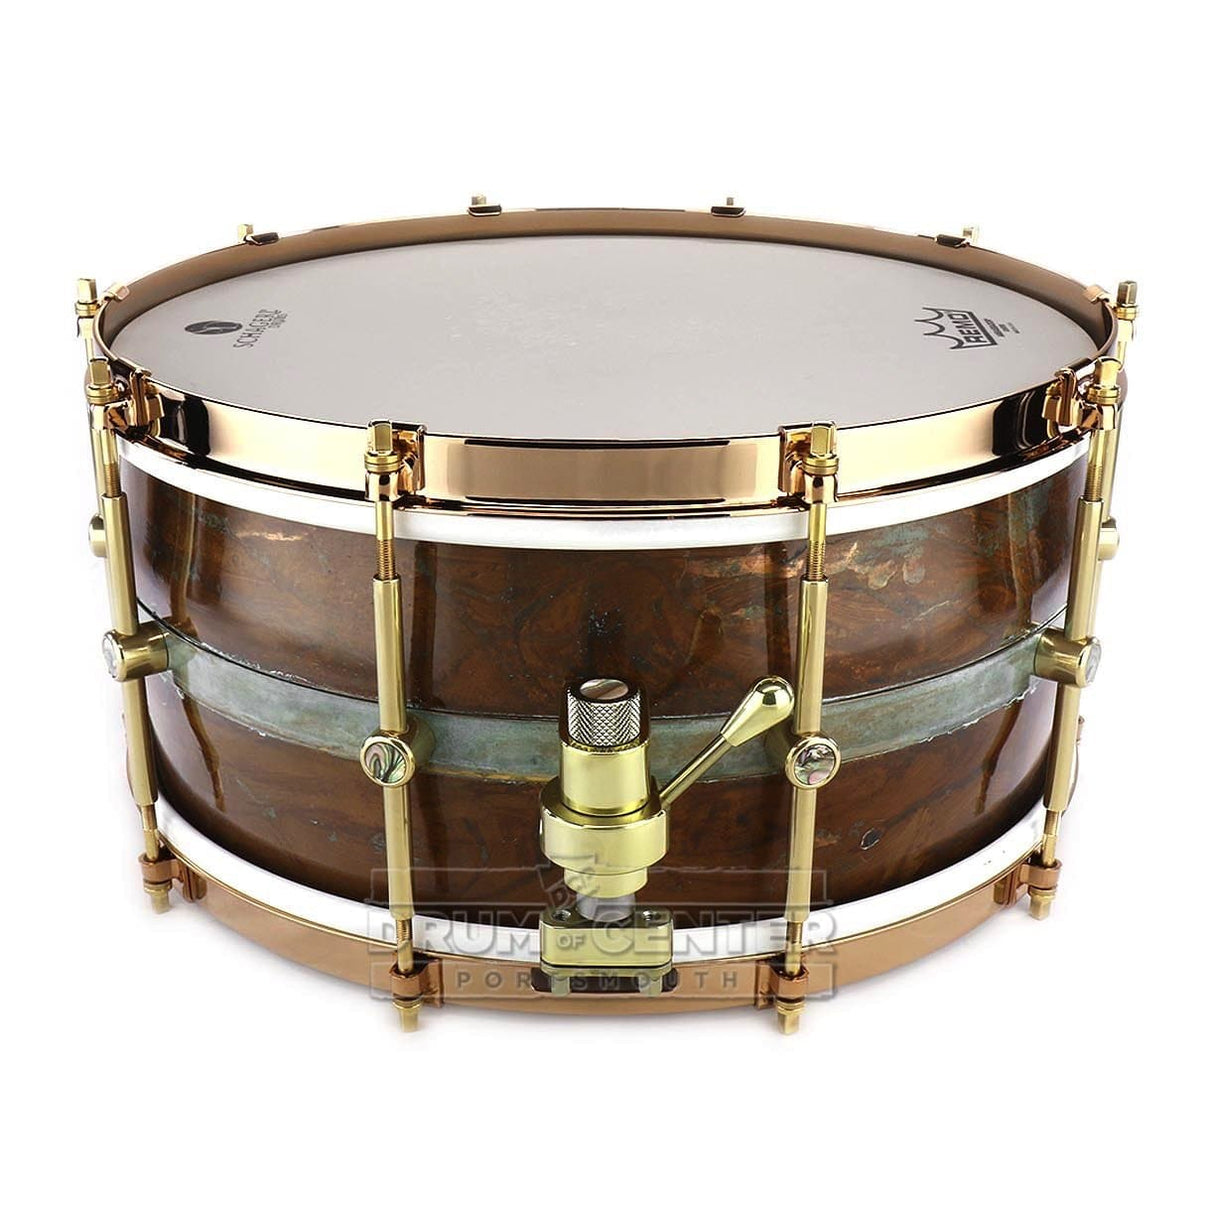 Schagerl Custom Series Snare Drum 14x6.5 Mother of Pearl